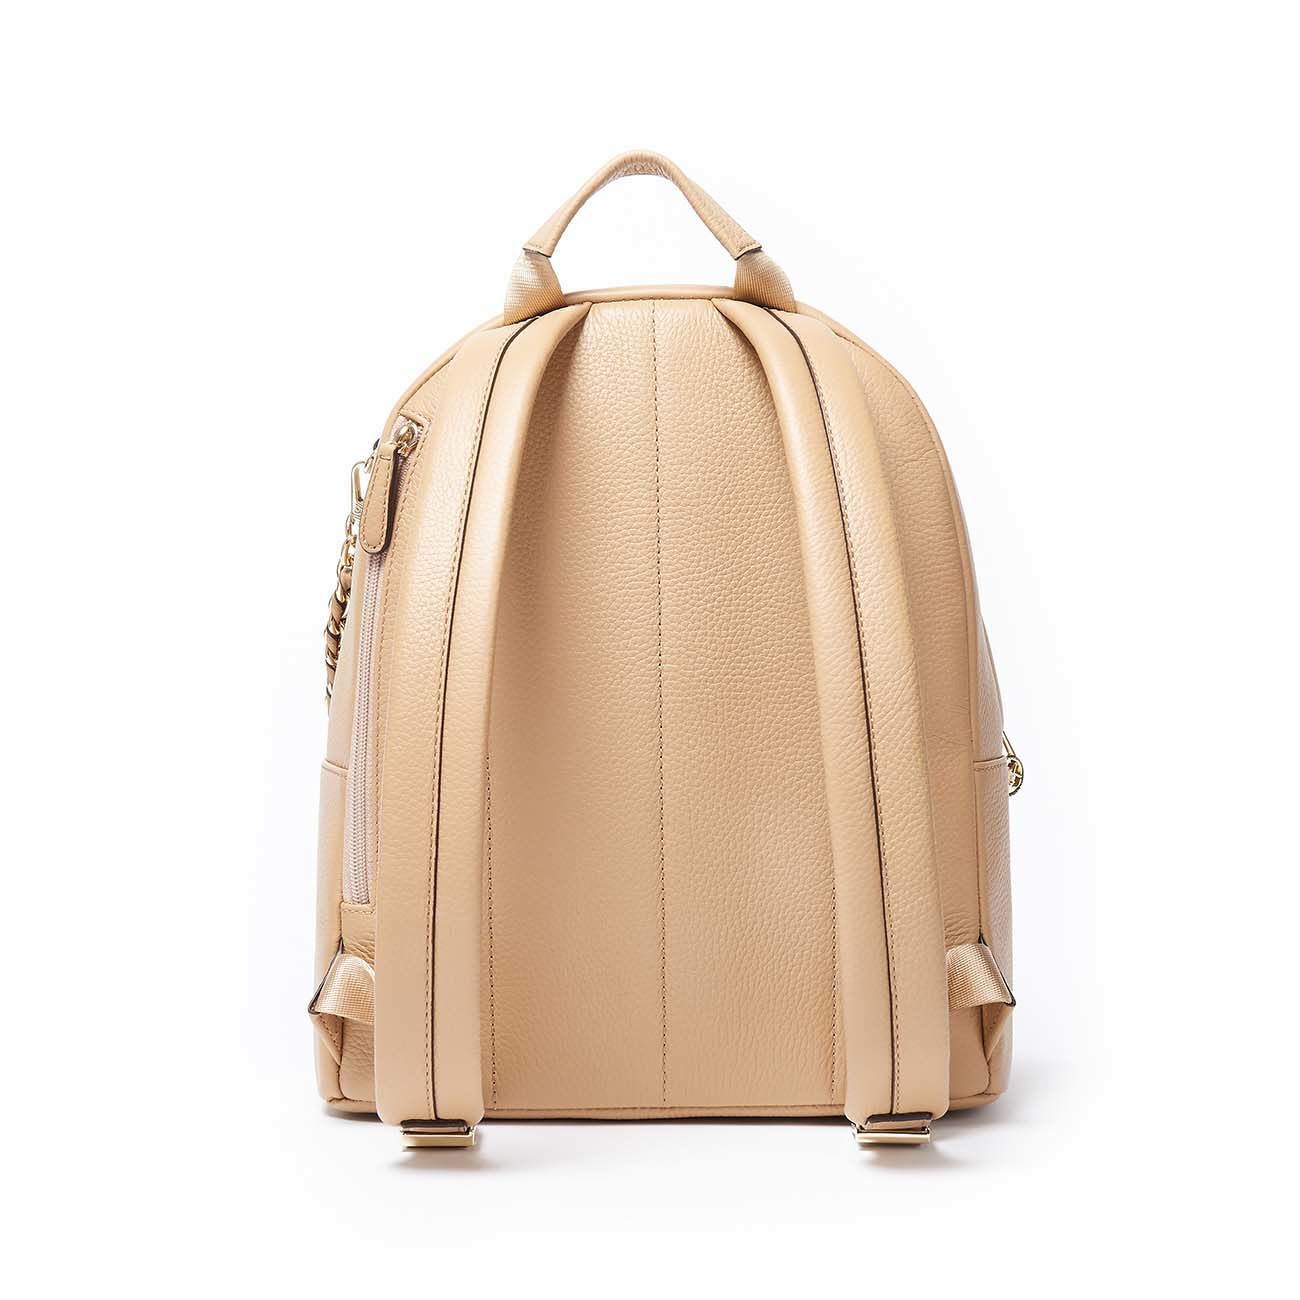 MICHAEL KORS SLATER PEBBLED LEATHER BACKPACK WITH GOLD CHAIN Woman Camel |  Mascheroni Store